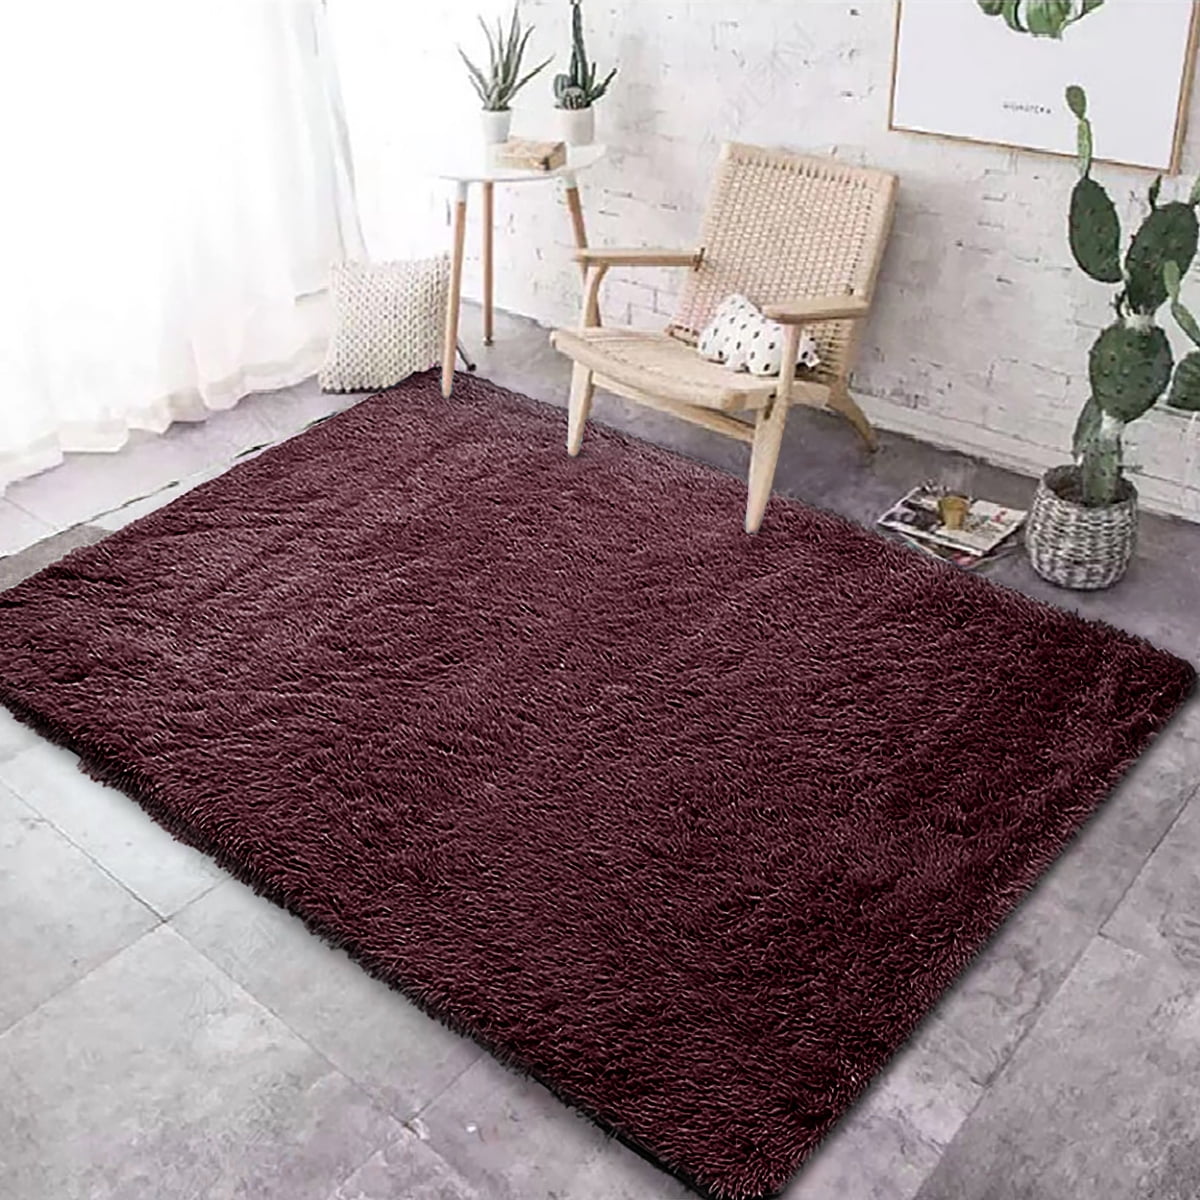 Children rug Kids Rugs Area Indoor Floor Carpets Soft Fluffy Shaggy 4 By 5 Feet 